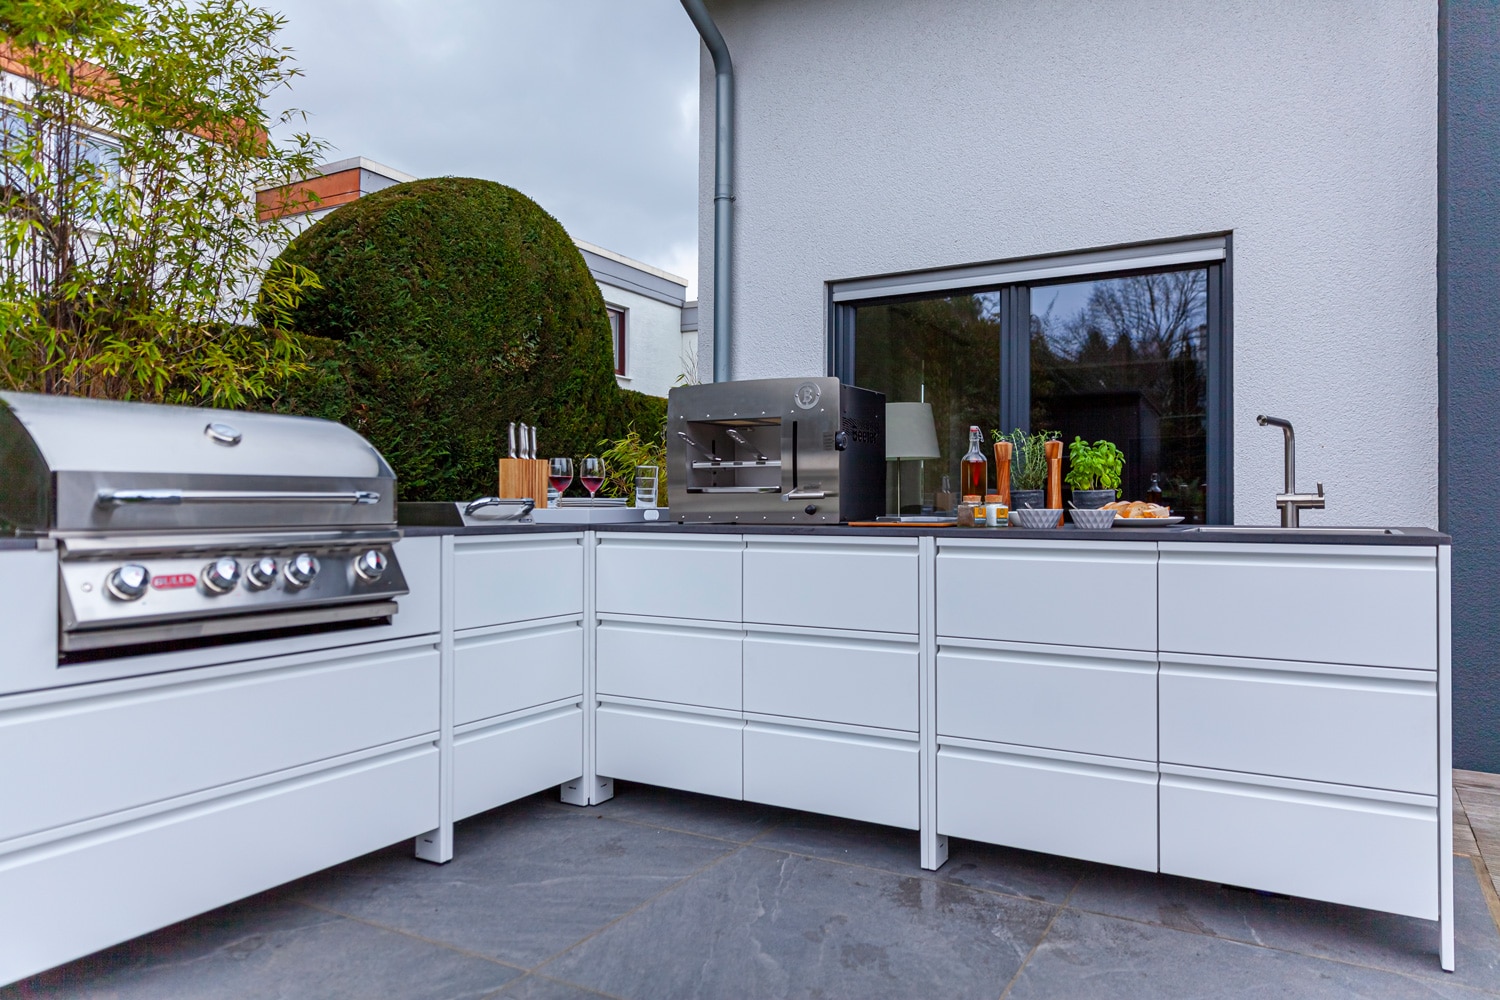 Image of Belmento 6 in Ideal for convivial grill kitchens - Cosentino